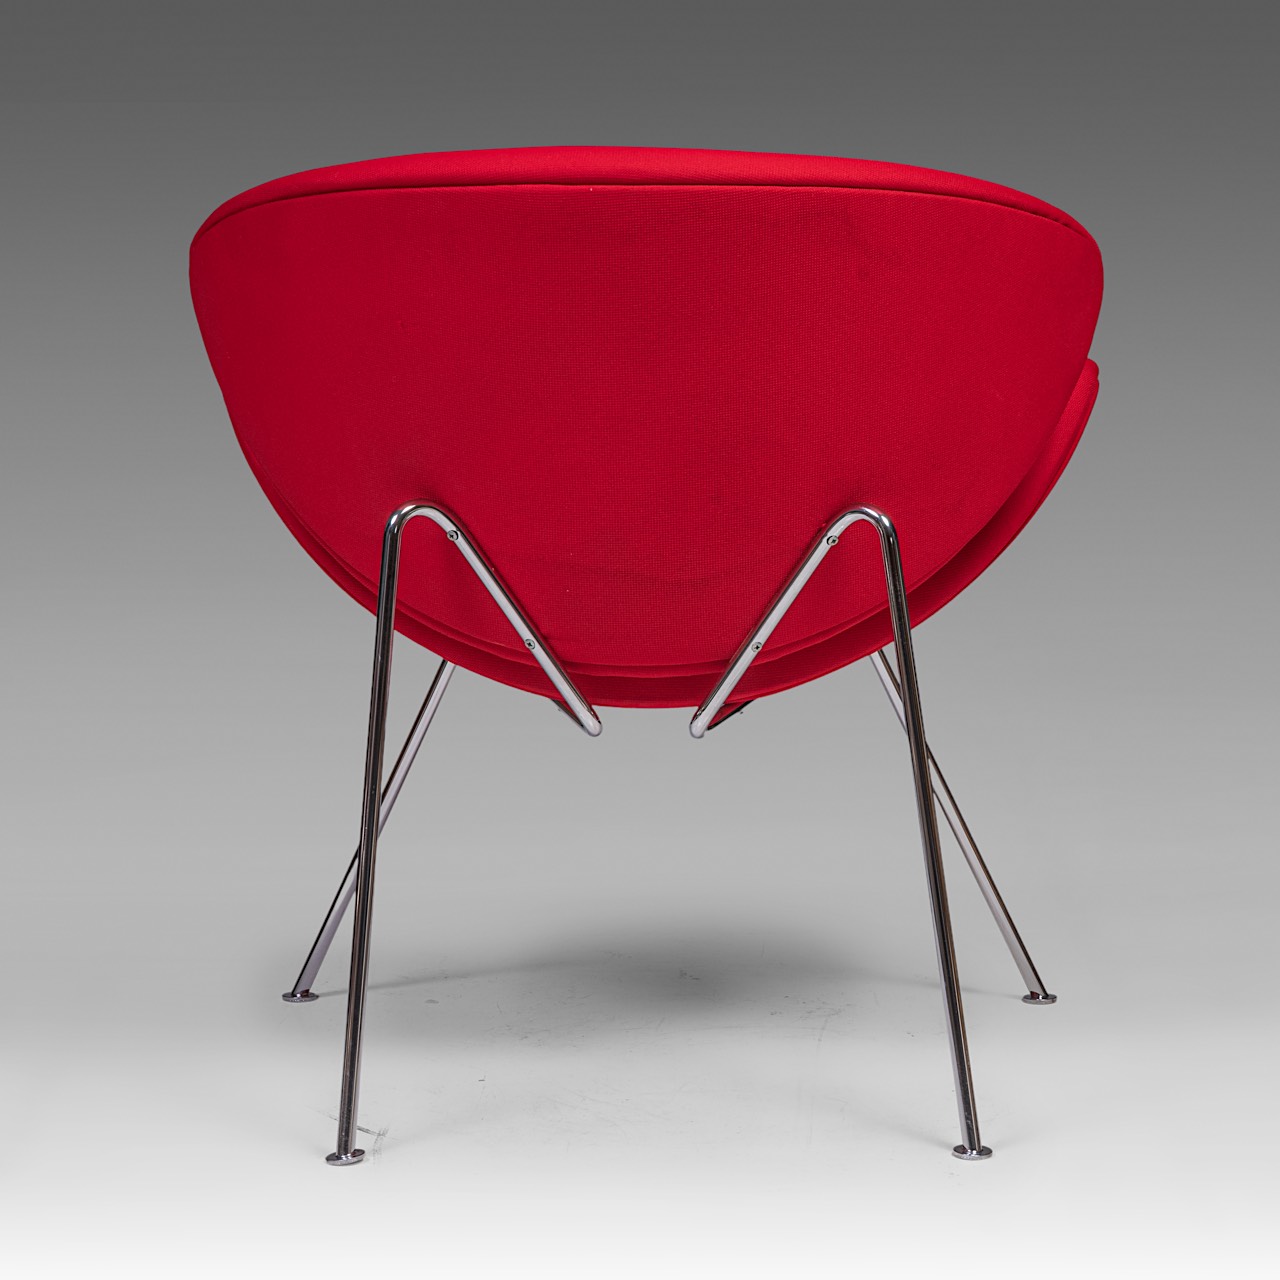 An Orange Slice chair by Pierre Pauline for Artifort, H 85 - W 82 cm - Image 5 of 9